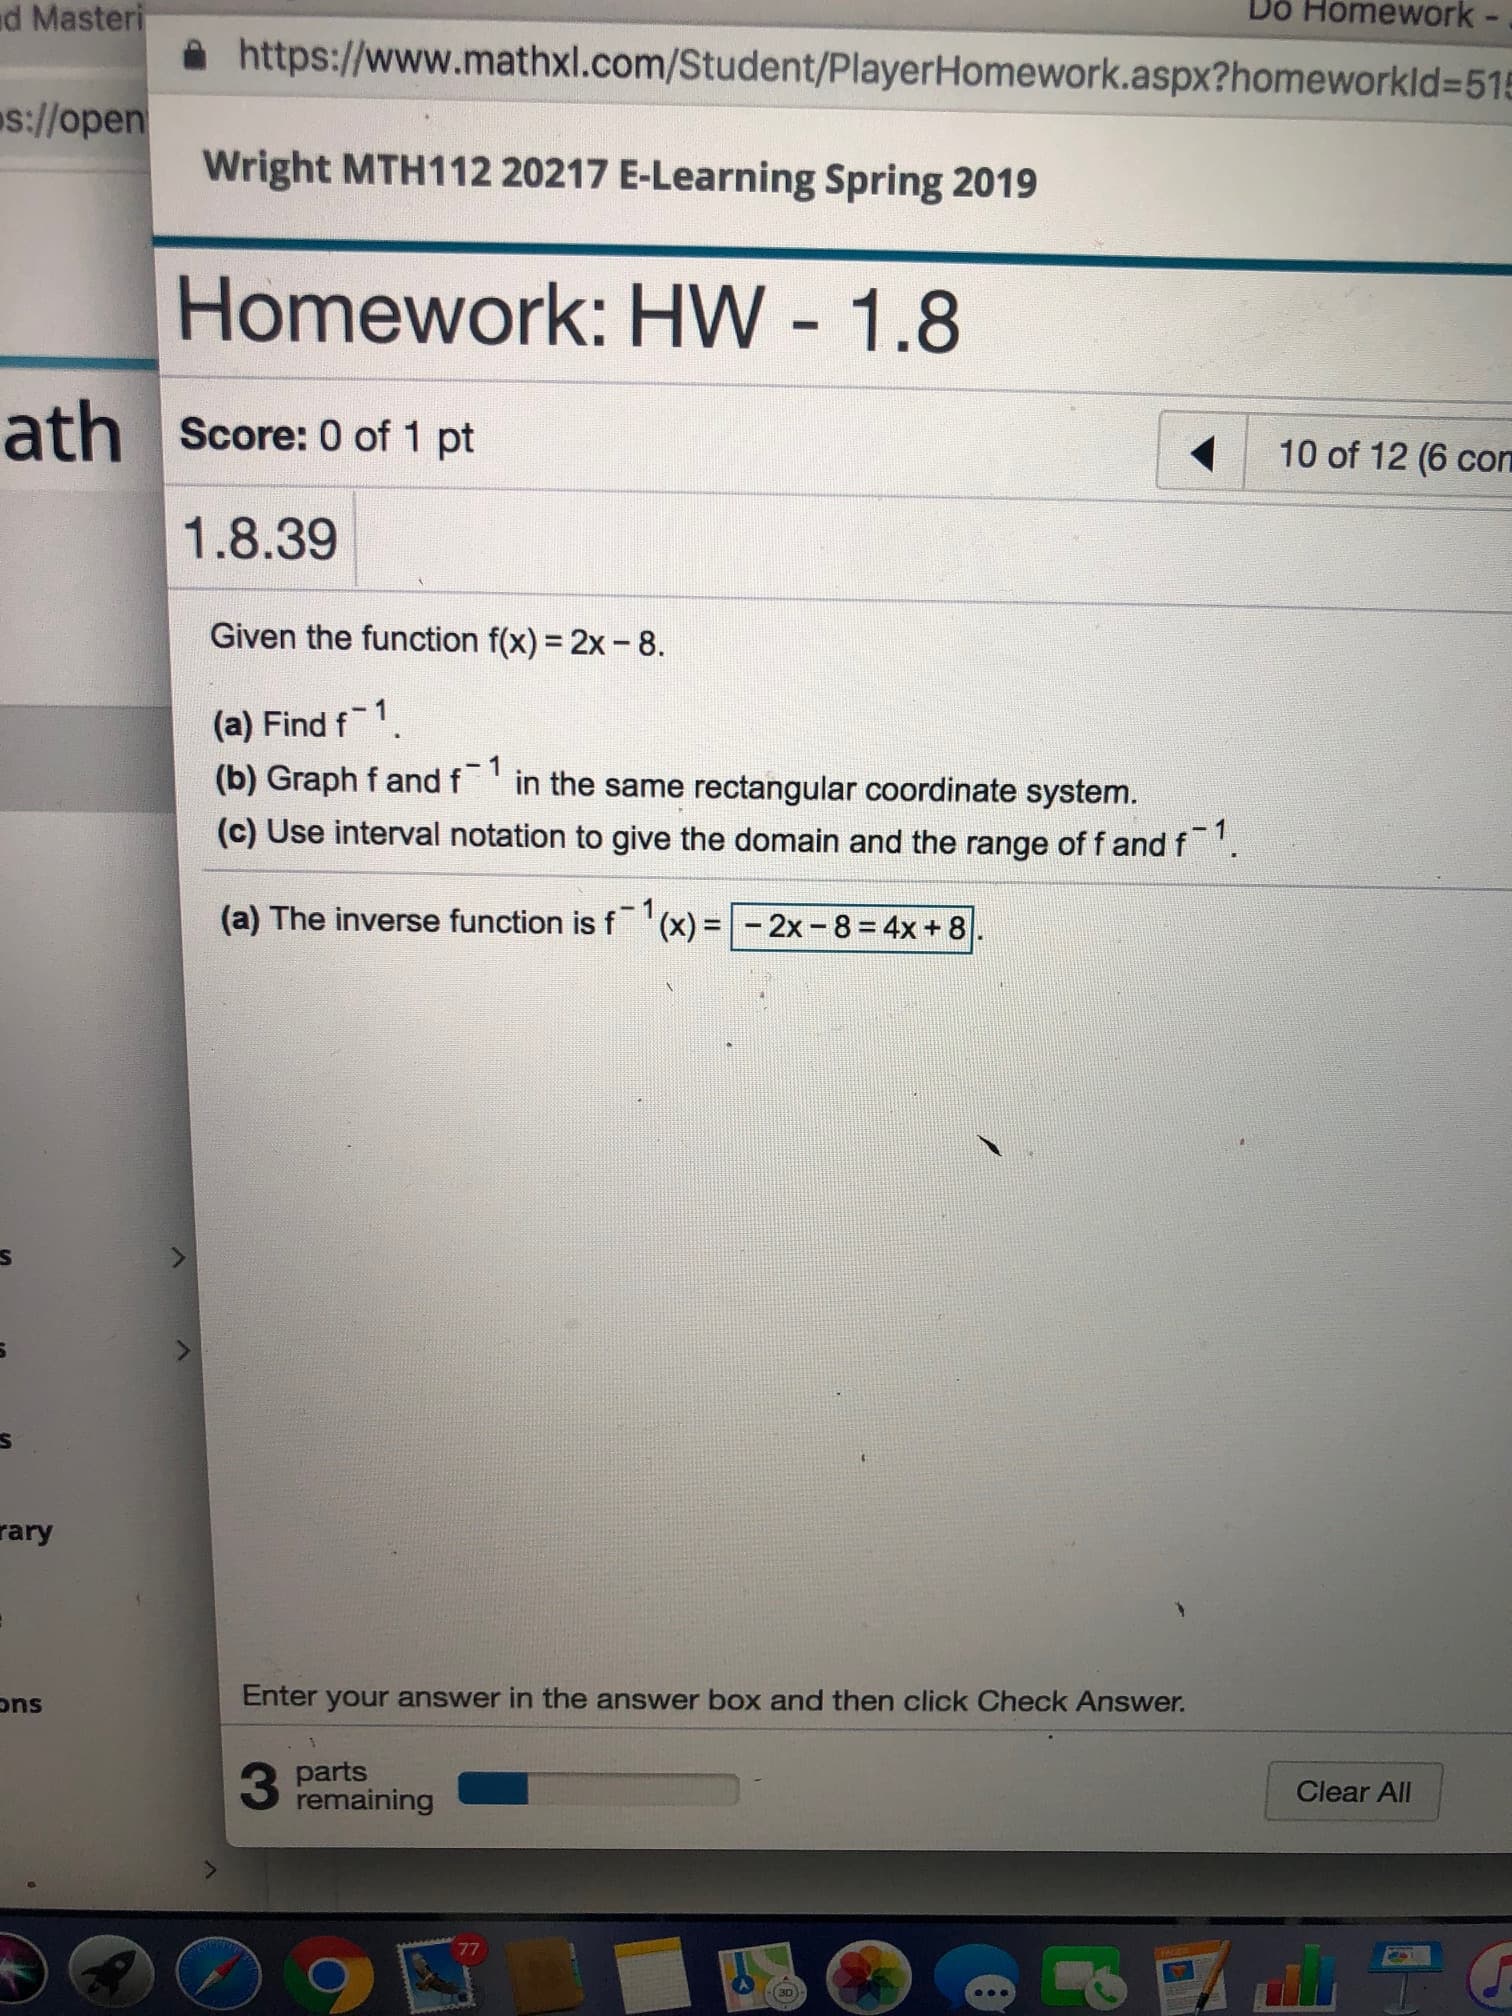 Do Homework -
d Masteri
욜 https://www.mathxl.com/Student/PlayerHomework.aspx?homeworkid=5%
s:!lopen wright
Wright MTH112 20217 E-Learning Spring 2019
Homework: HW 1.8
Score: 0 of 1 pt
10 of 12 (6 con
1.8.39
Given the function f(x) = 2x-8.
(a) Find f1.
(b) Graph f and f in the same rectangular coordinate system.
(c) Use interval notation to give the domain and the range of f and f
(a) The inverse function is f-1 (x) = E 2x-8 = 4x + 81
].
rary
Enter your answer in the answer box and then click Check Answer.
ons
parts
Clear All
3 Pemtaining
30
